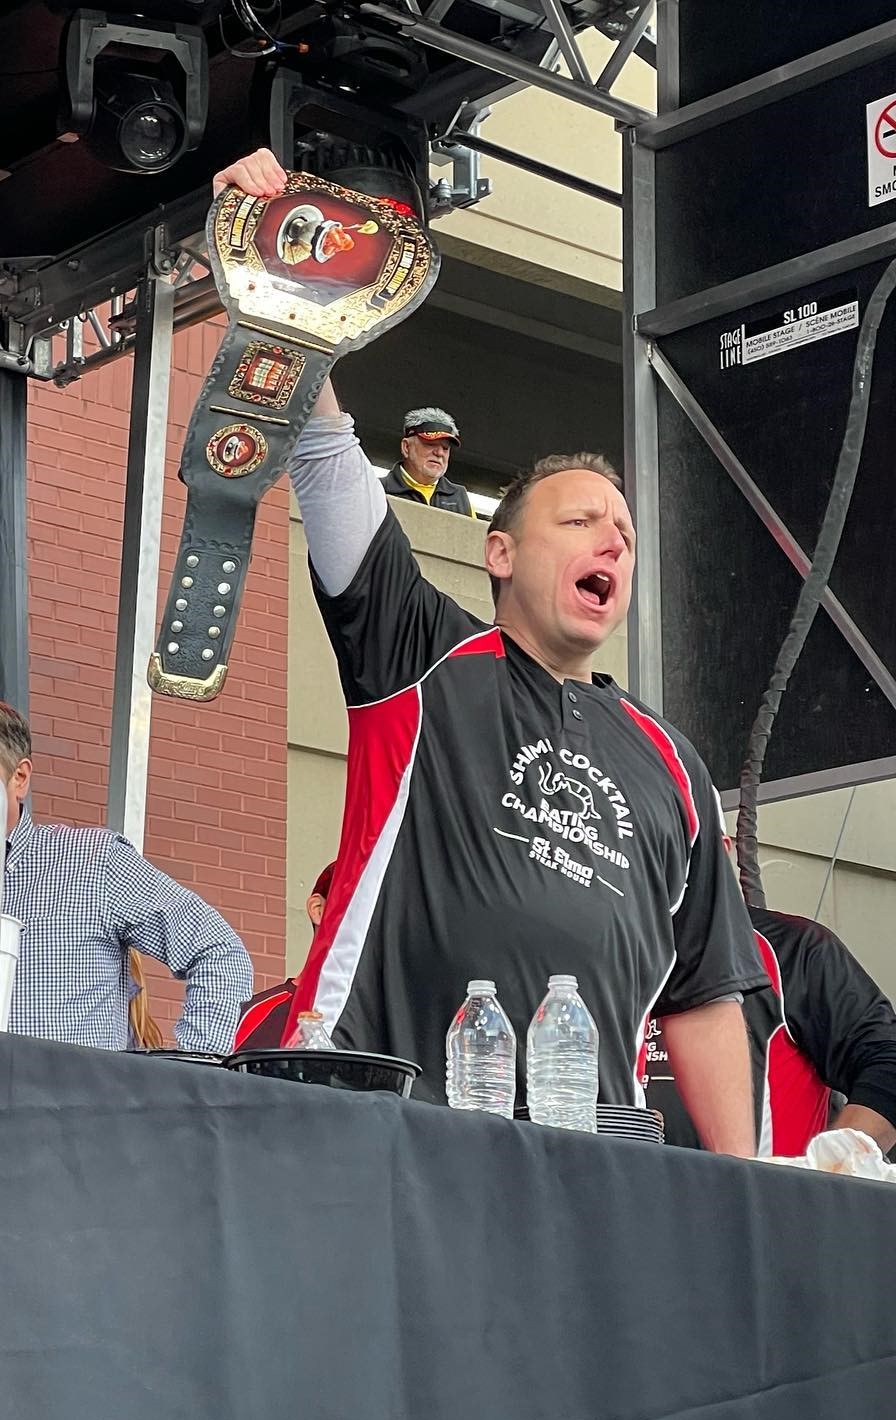 The World-Famous St. Elmo Shrimp Cocktail Eating Championship – At The Big Ten Tailgate Party Presented By Meijer